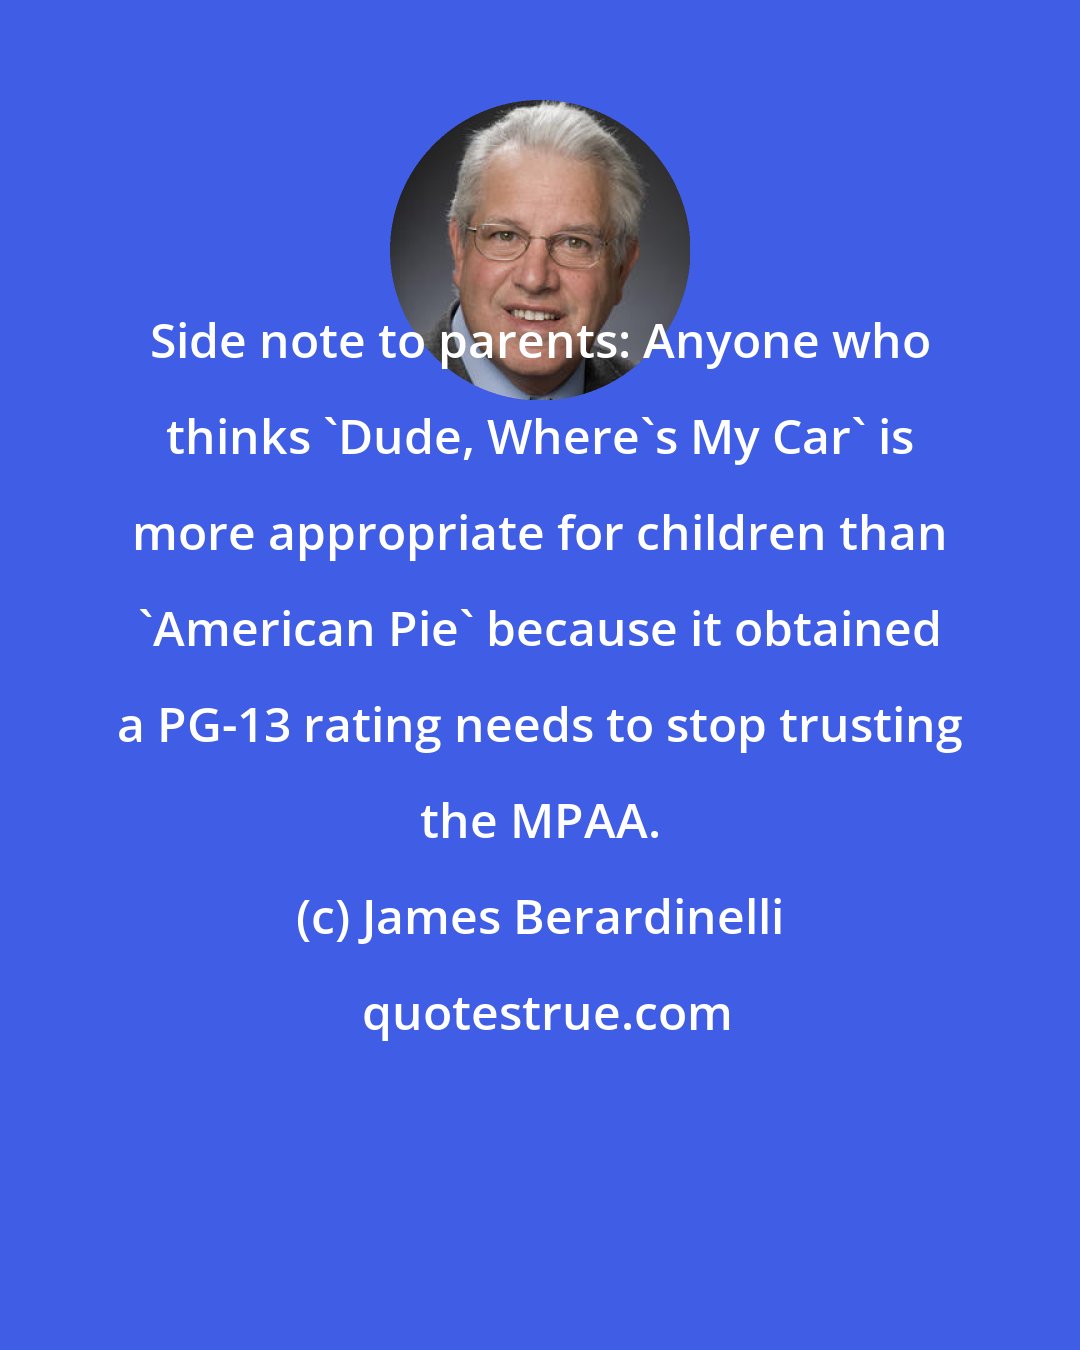 James Berardinelli: Side note to parents: Anyone who thinks 'Dude, Where's My Car' is more appropriate for children than 'American Pie' because it obtained a PG-13 rating needs to stop trusting the MPAA.